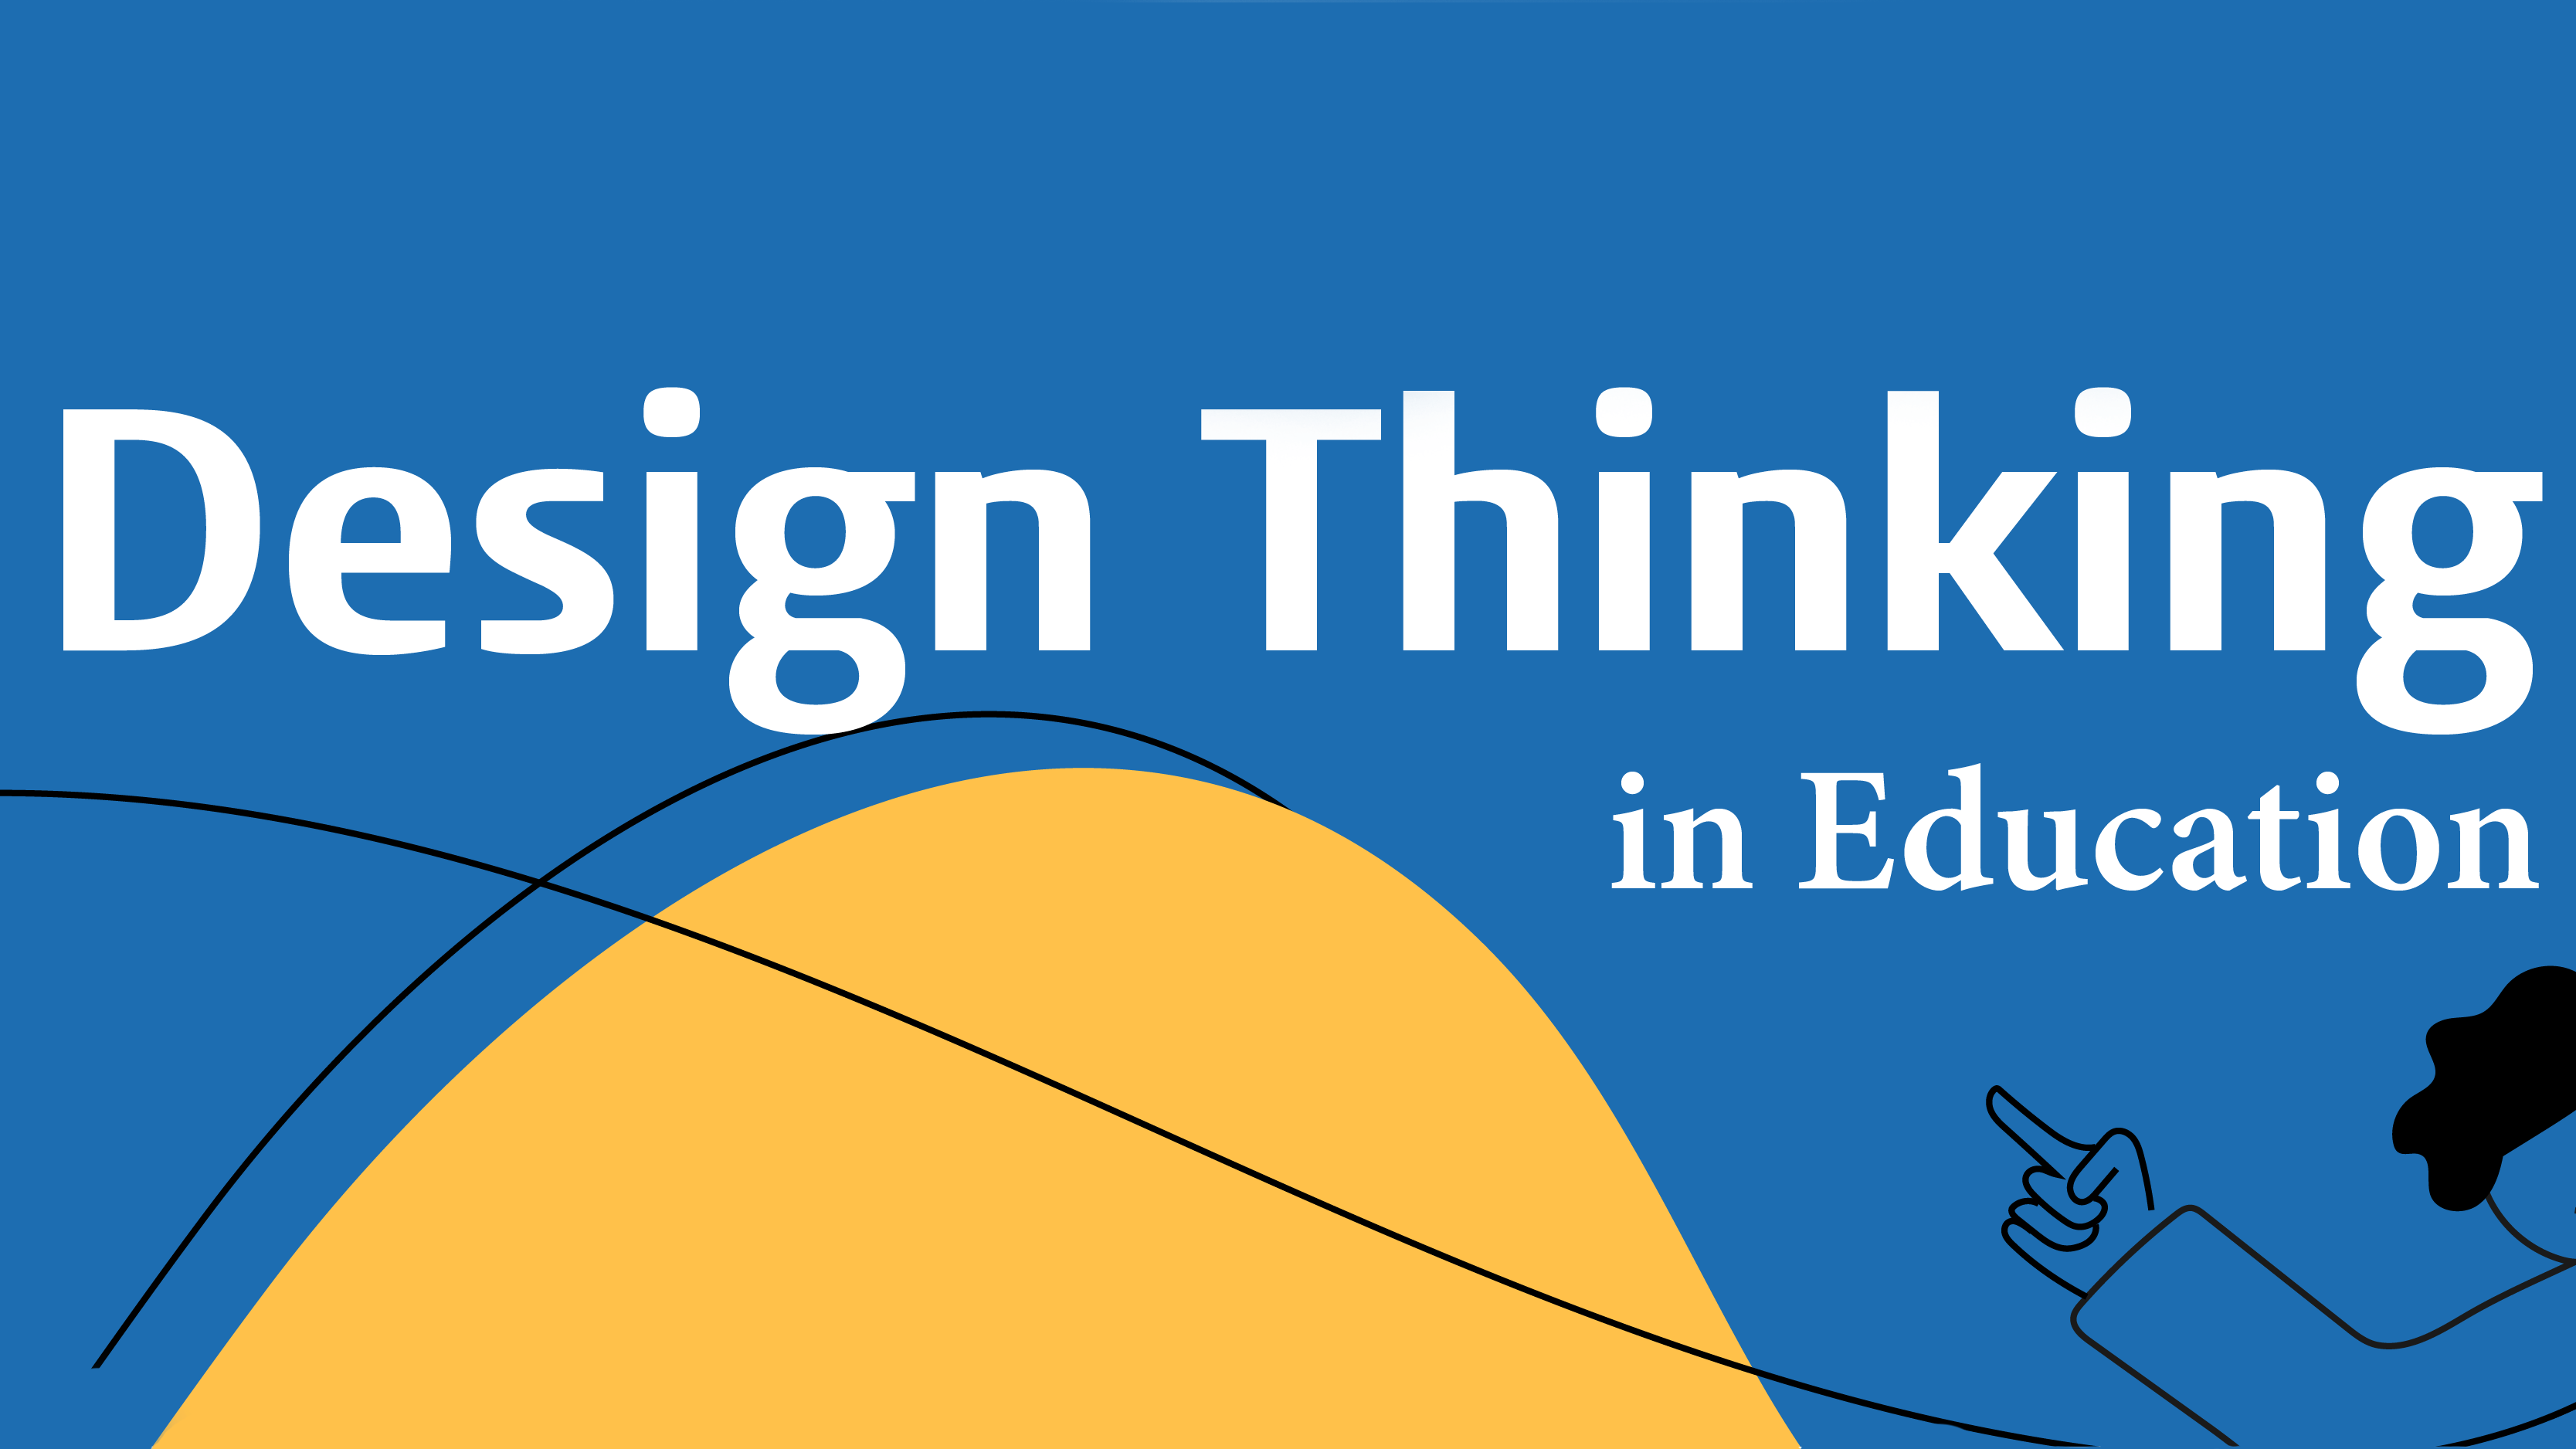 CFI Launches Design Thinking in Education Series